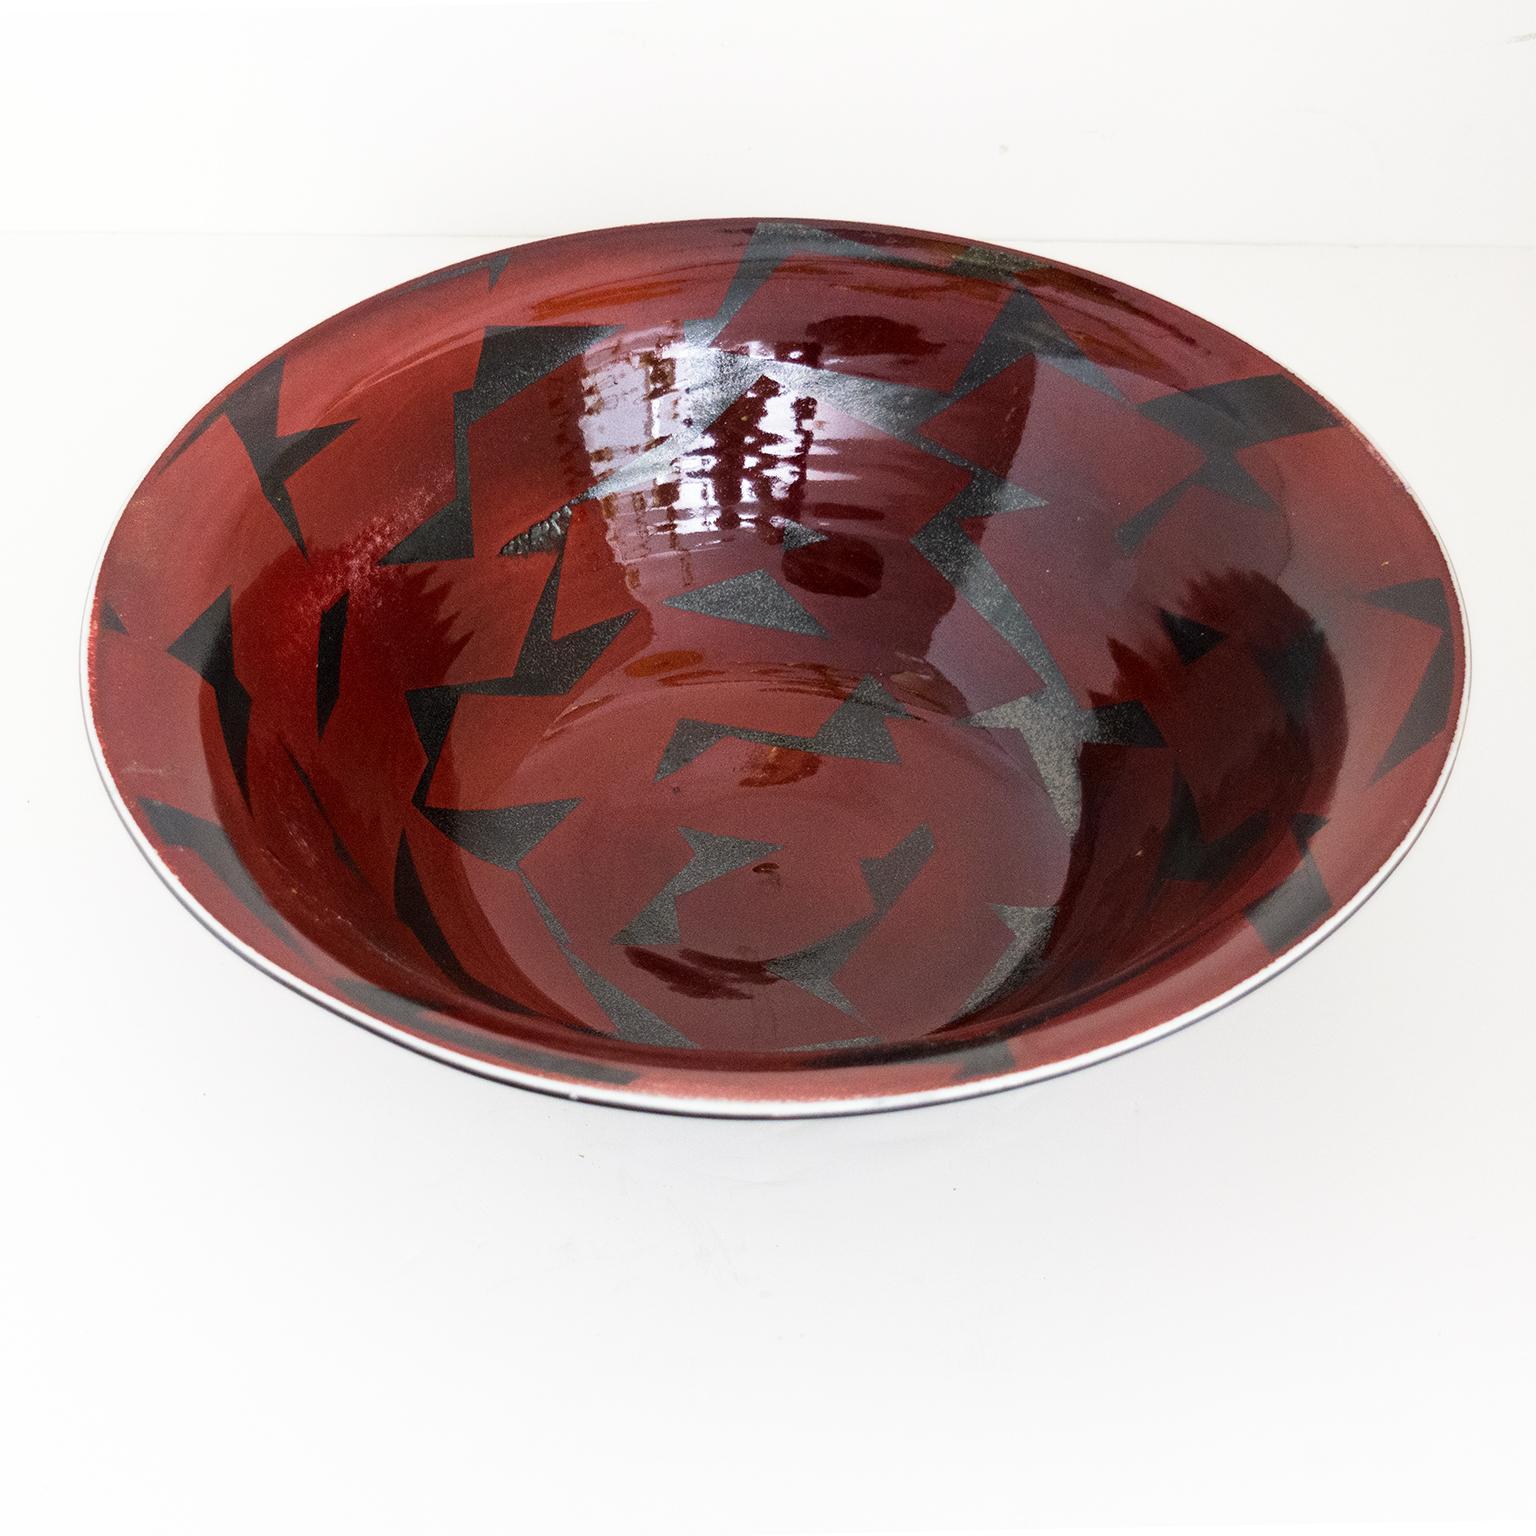 Inger Persson Scandinavian Modern Large Studio Bowl, Red & Black, 1988 Rorstrand In Good Condition For Sale In New York, NY